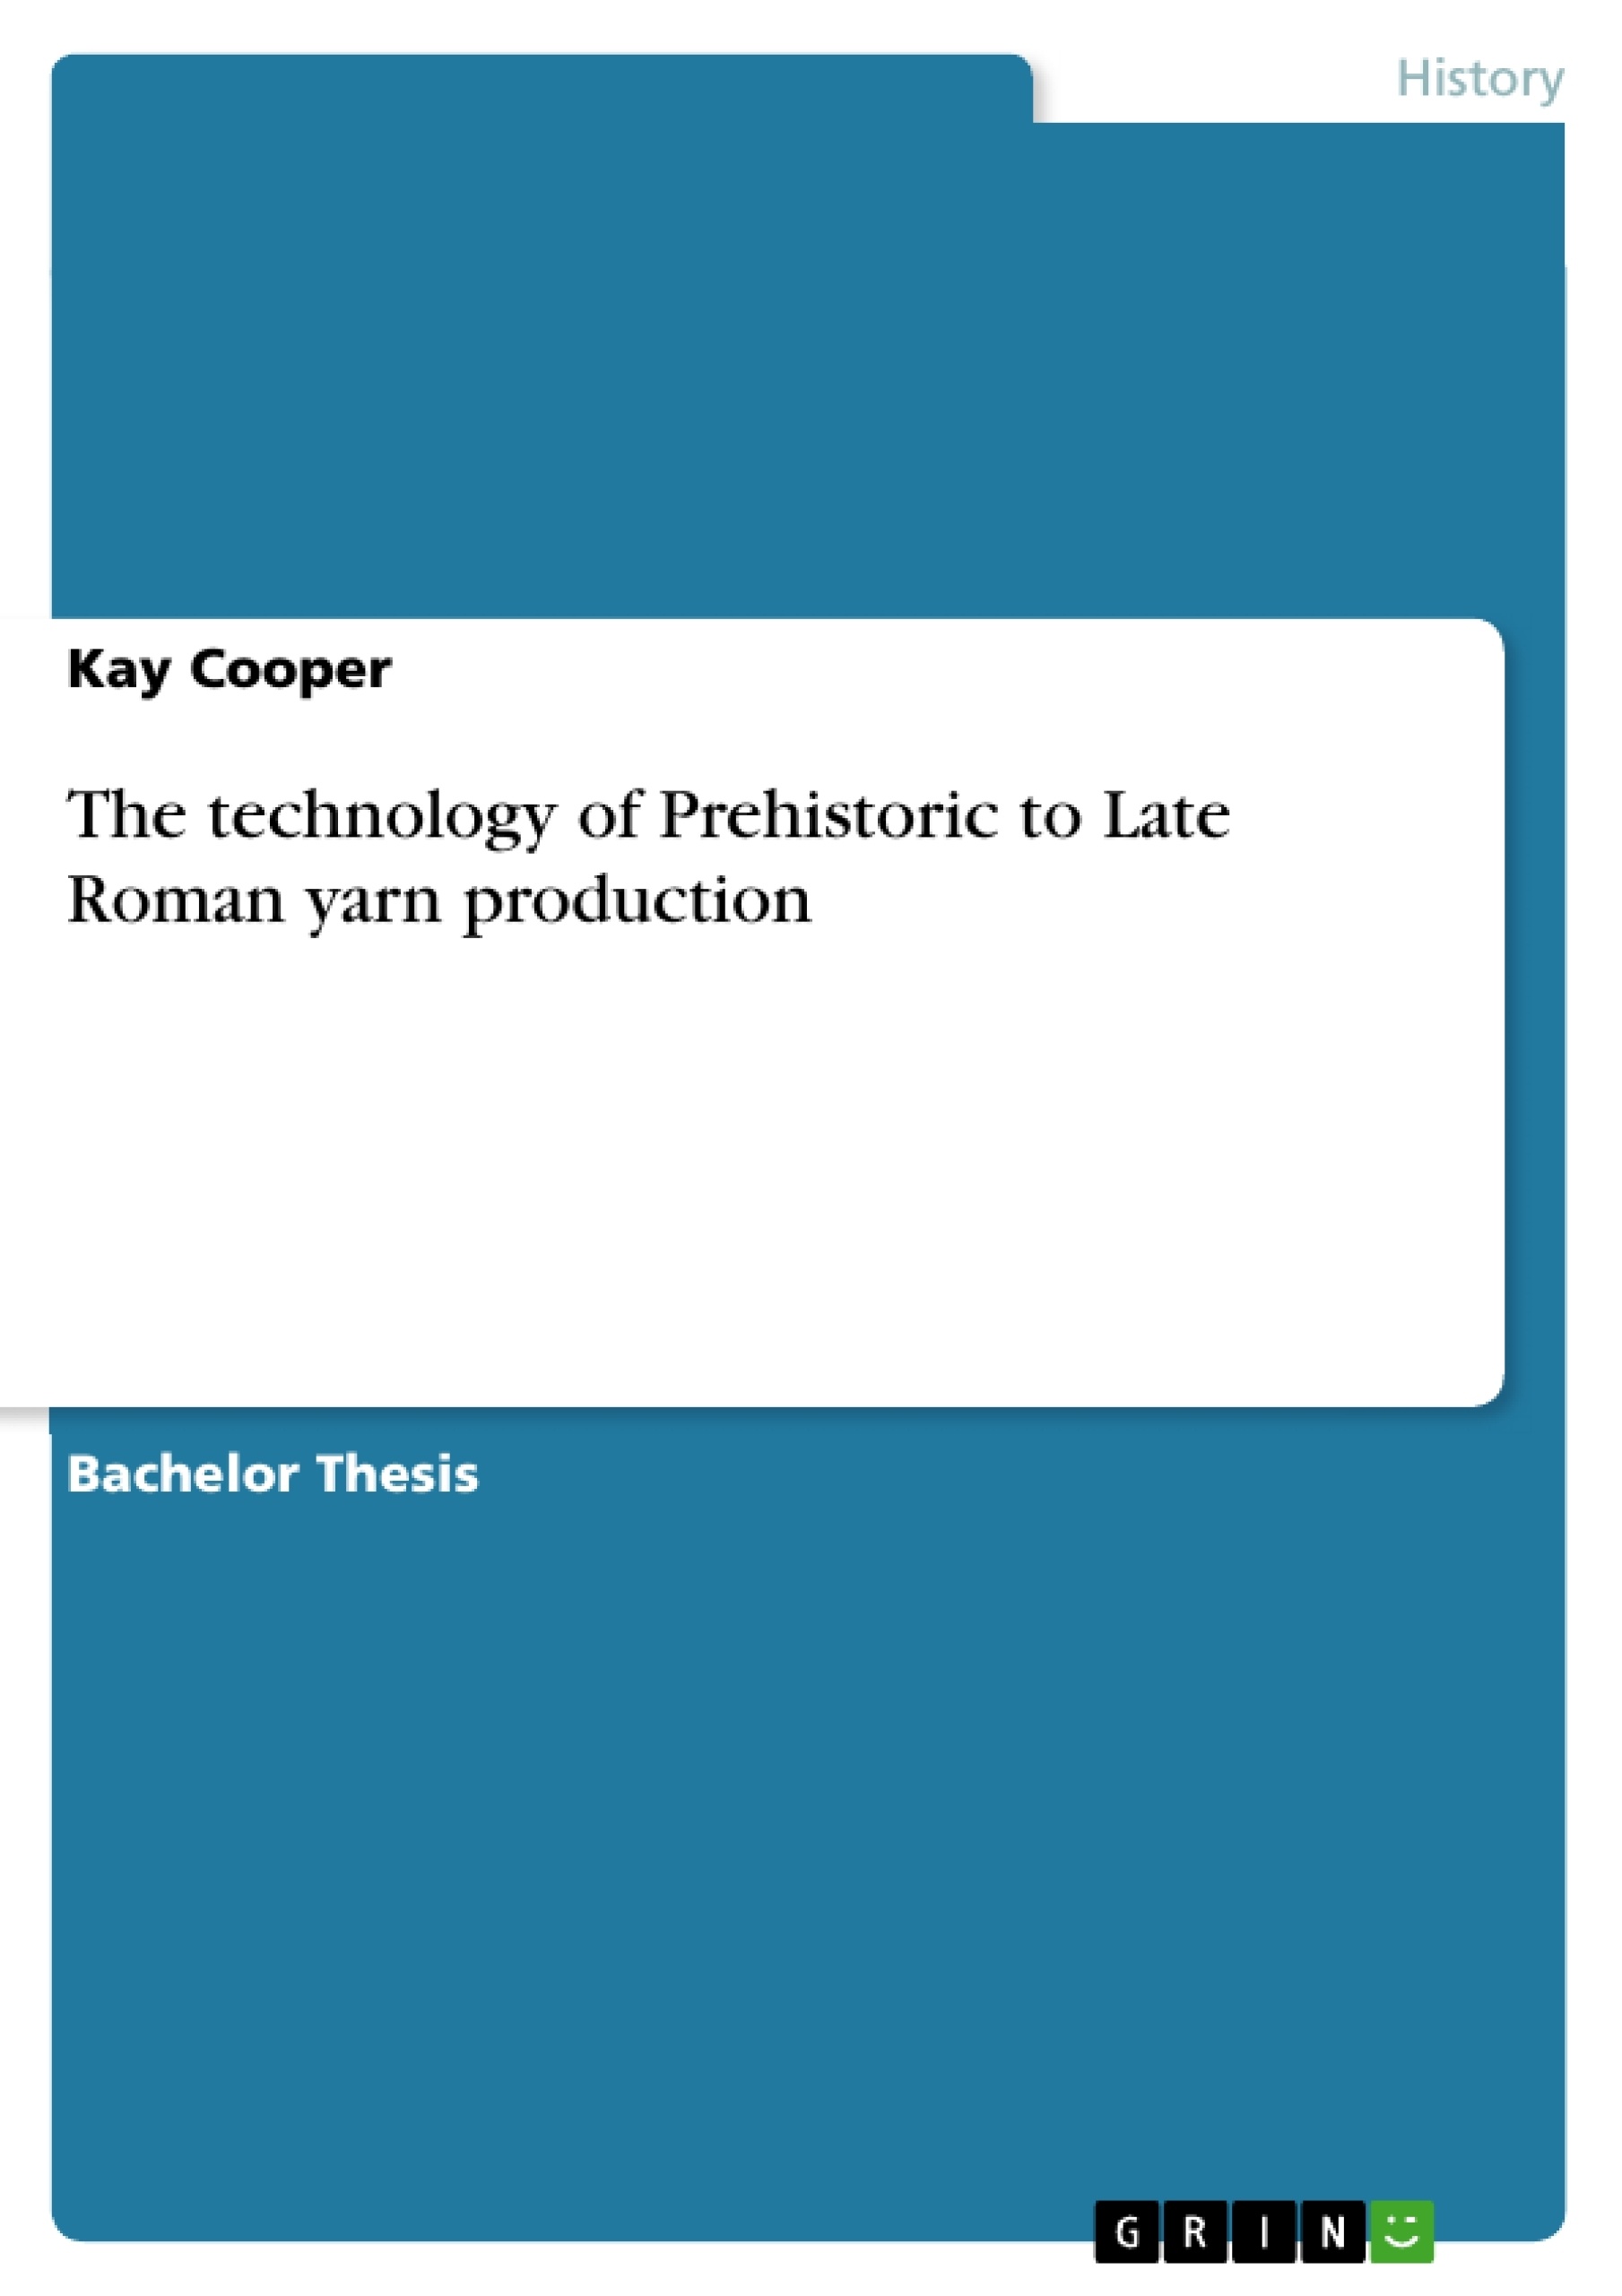 Titel: The technology of Prehistoric to Late Roman yarn production